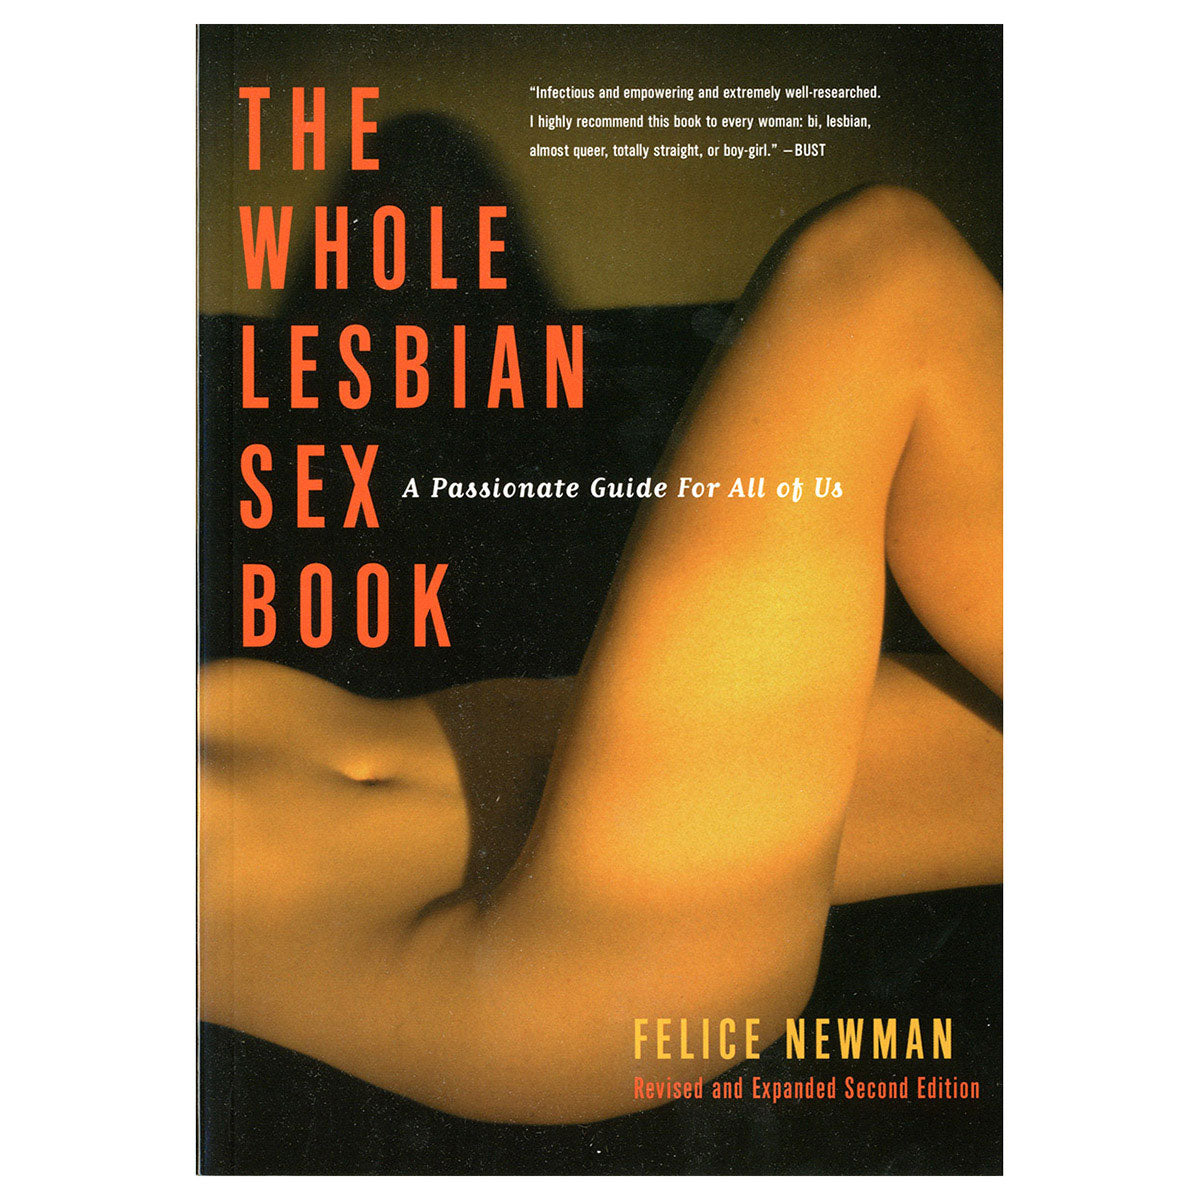 Whole Lesbian Sex Book - A Passionate Guide for All of Us pic